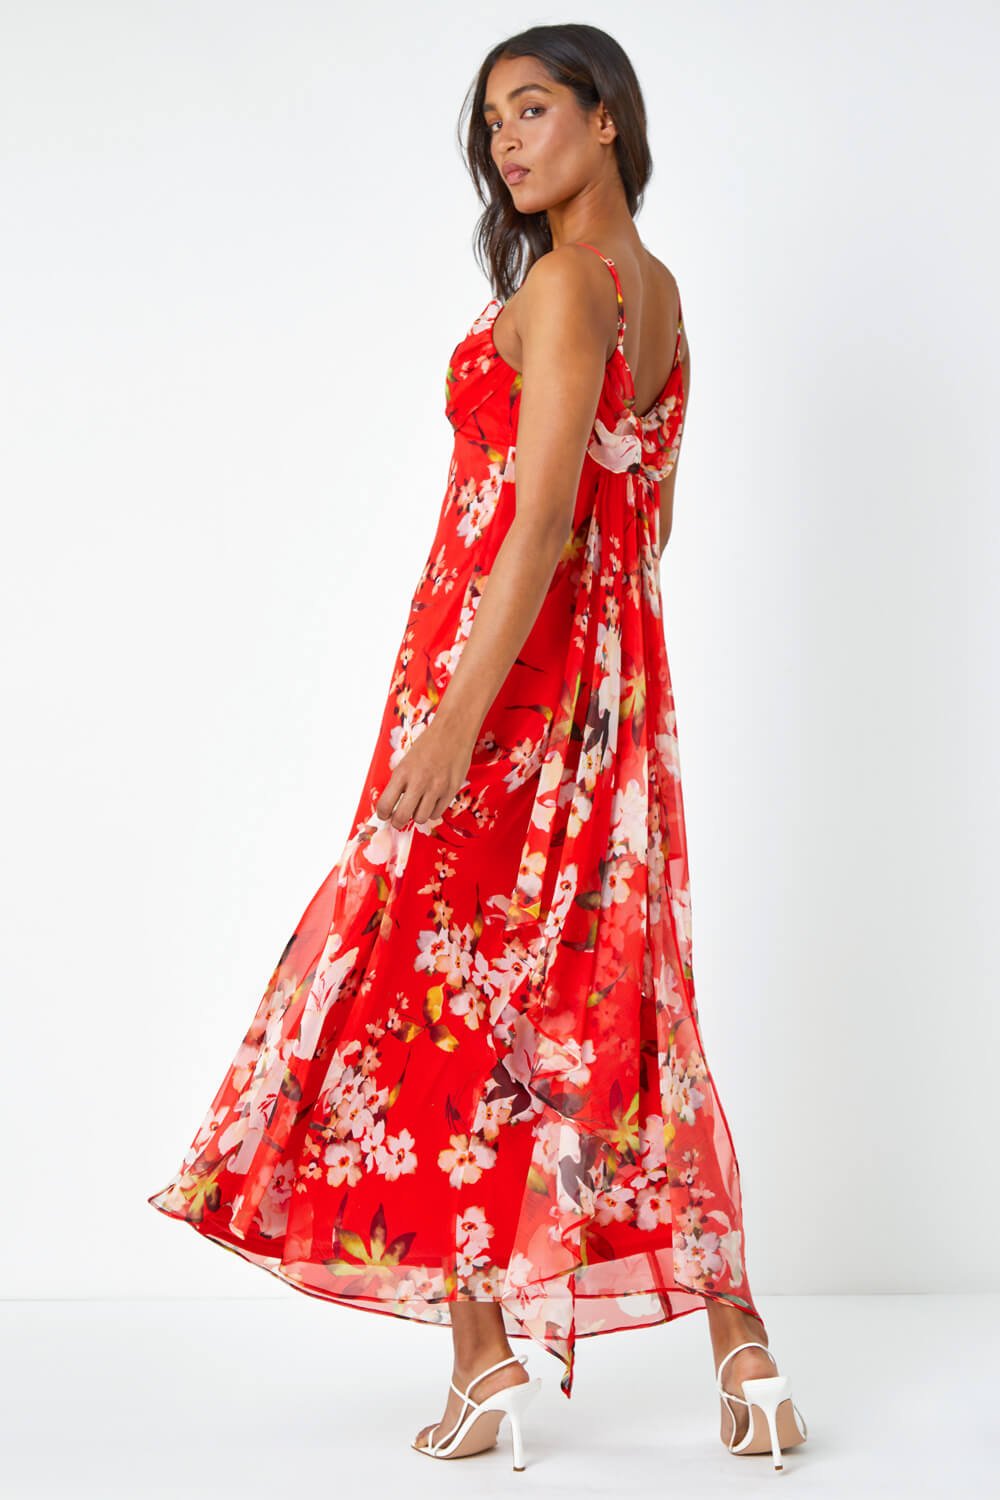 Red Floral Cowl Neck Chiffon Dress, Image 3 of 6